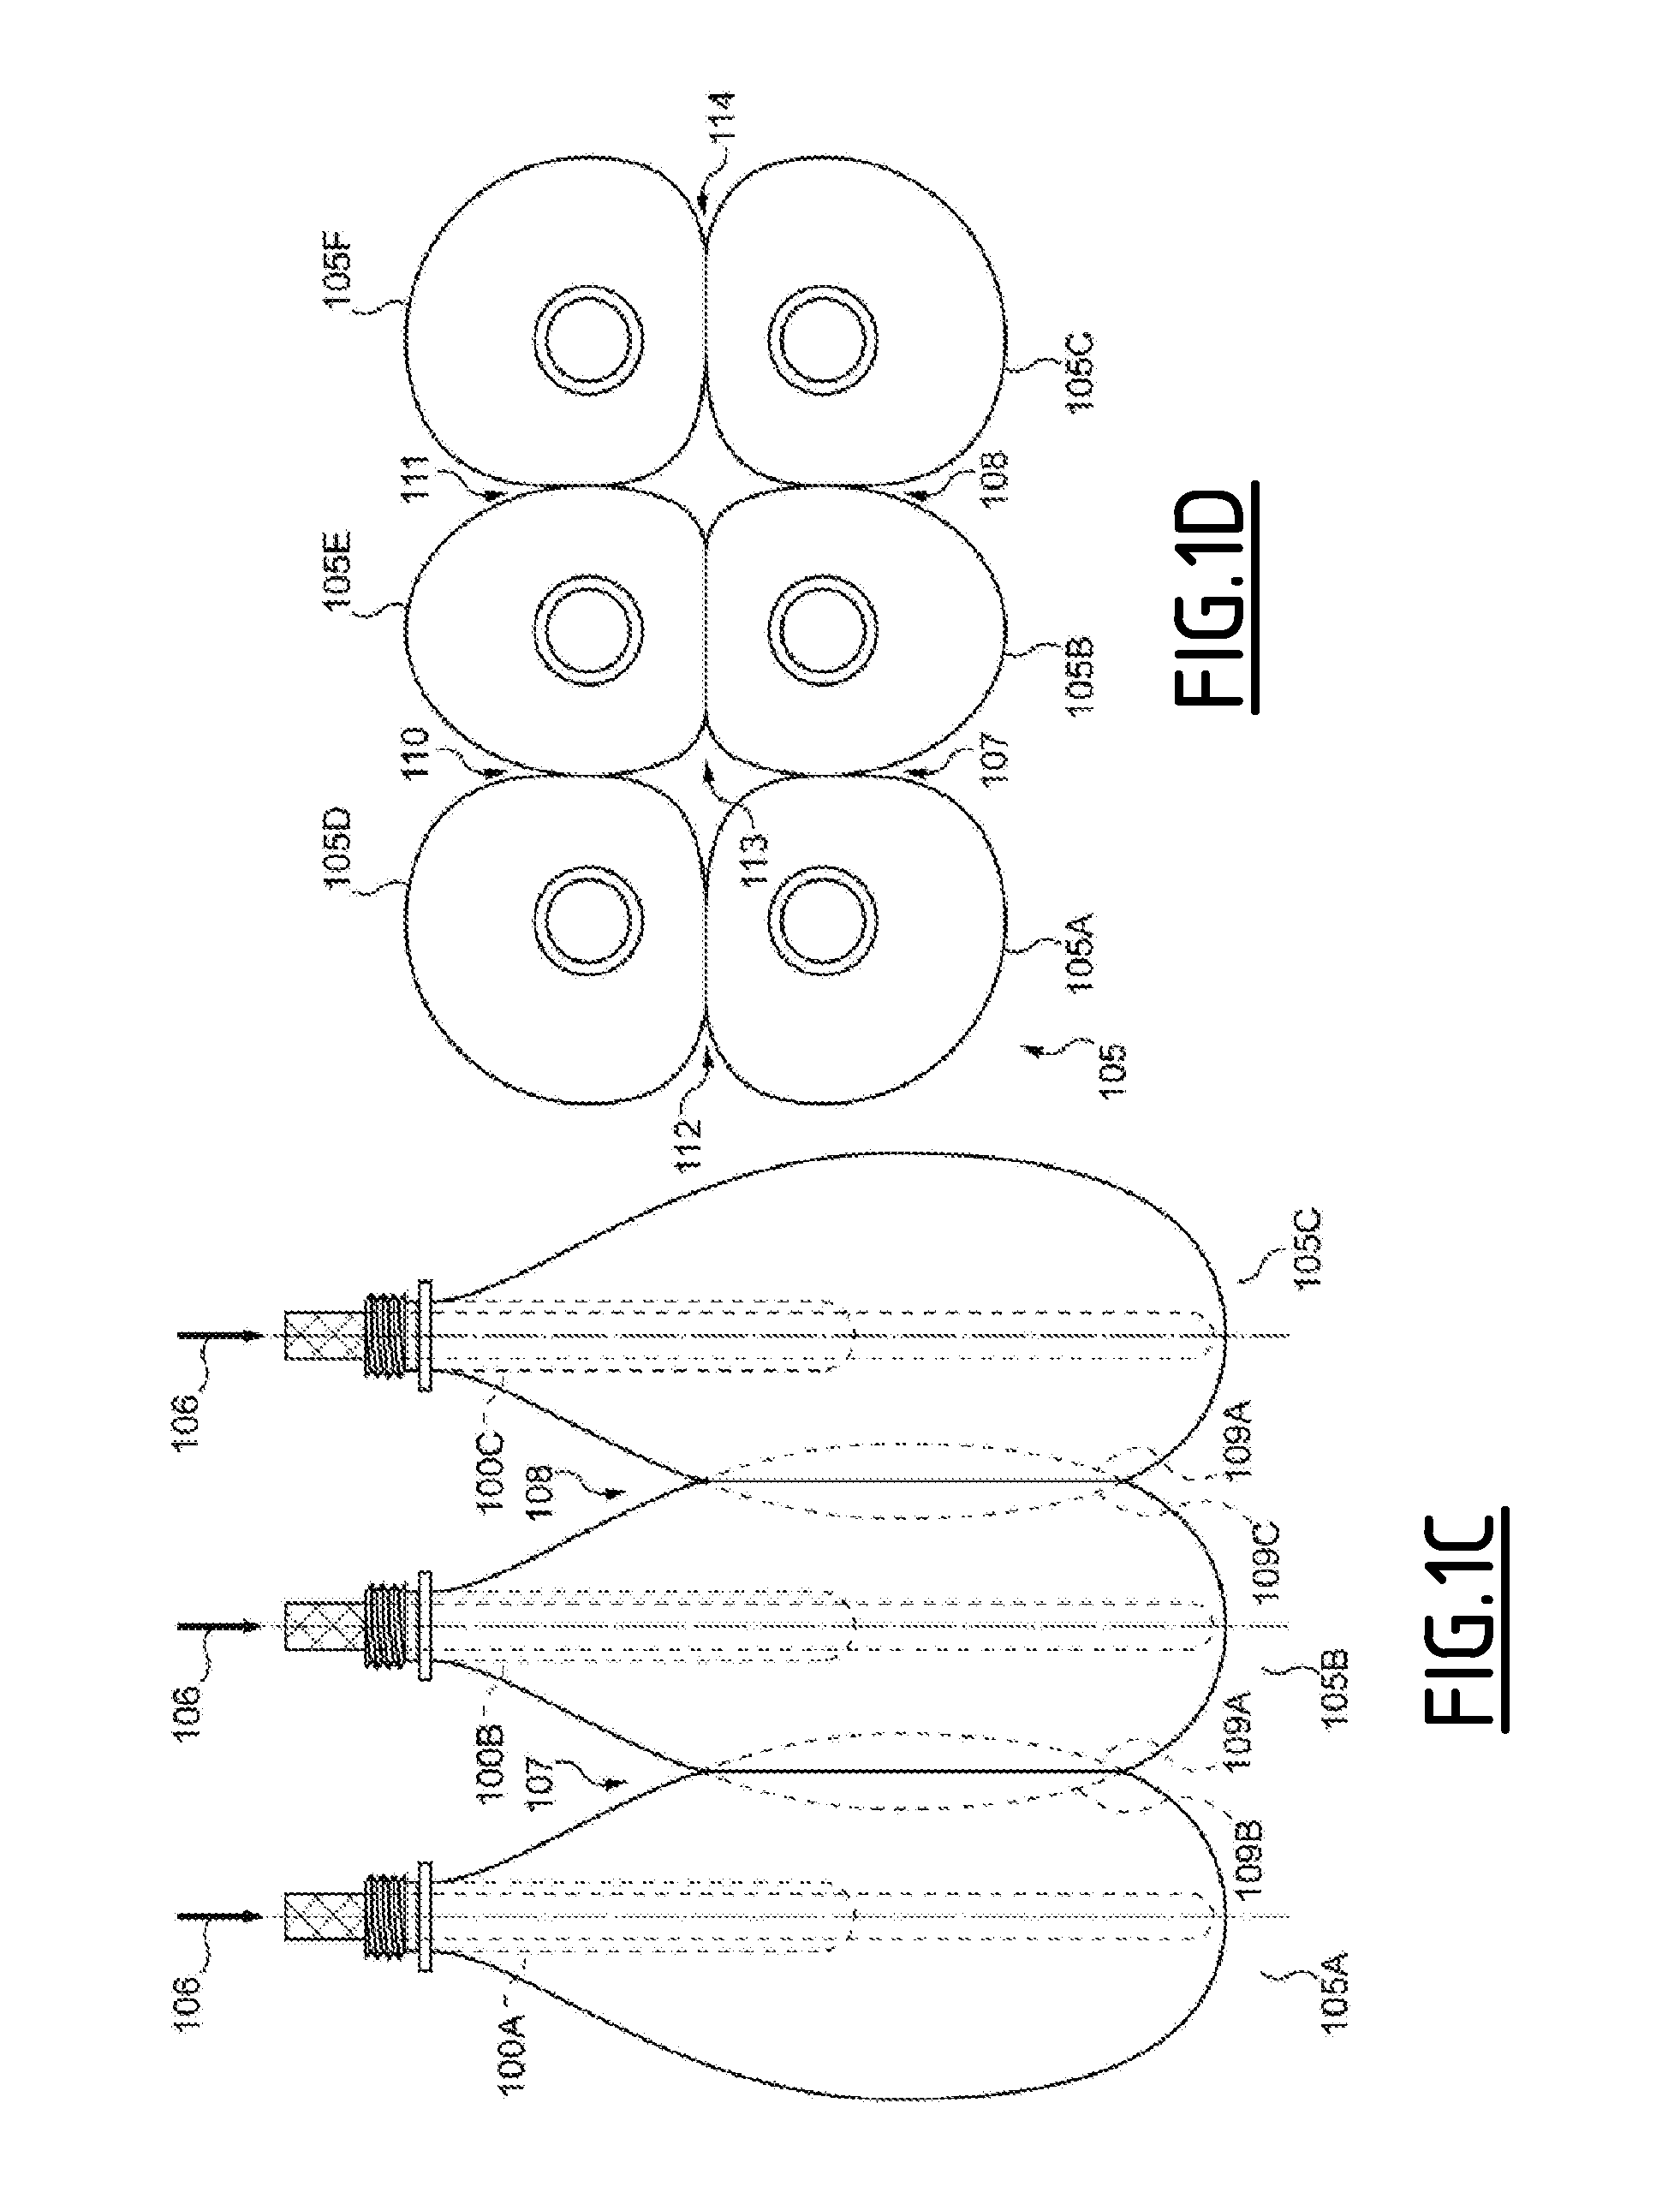 A method and apparatus for fabricating containers